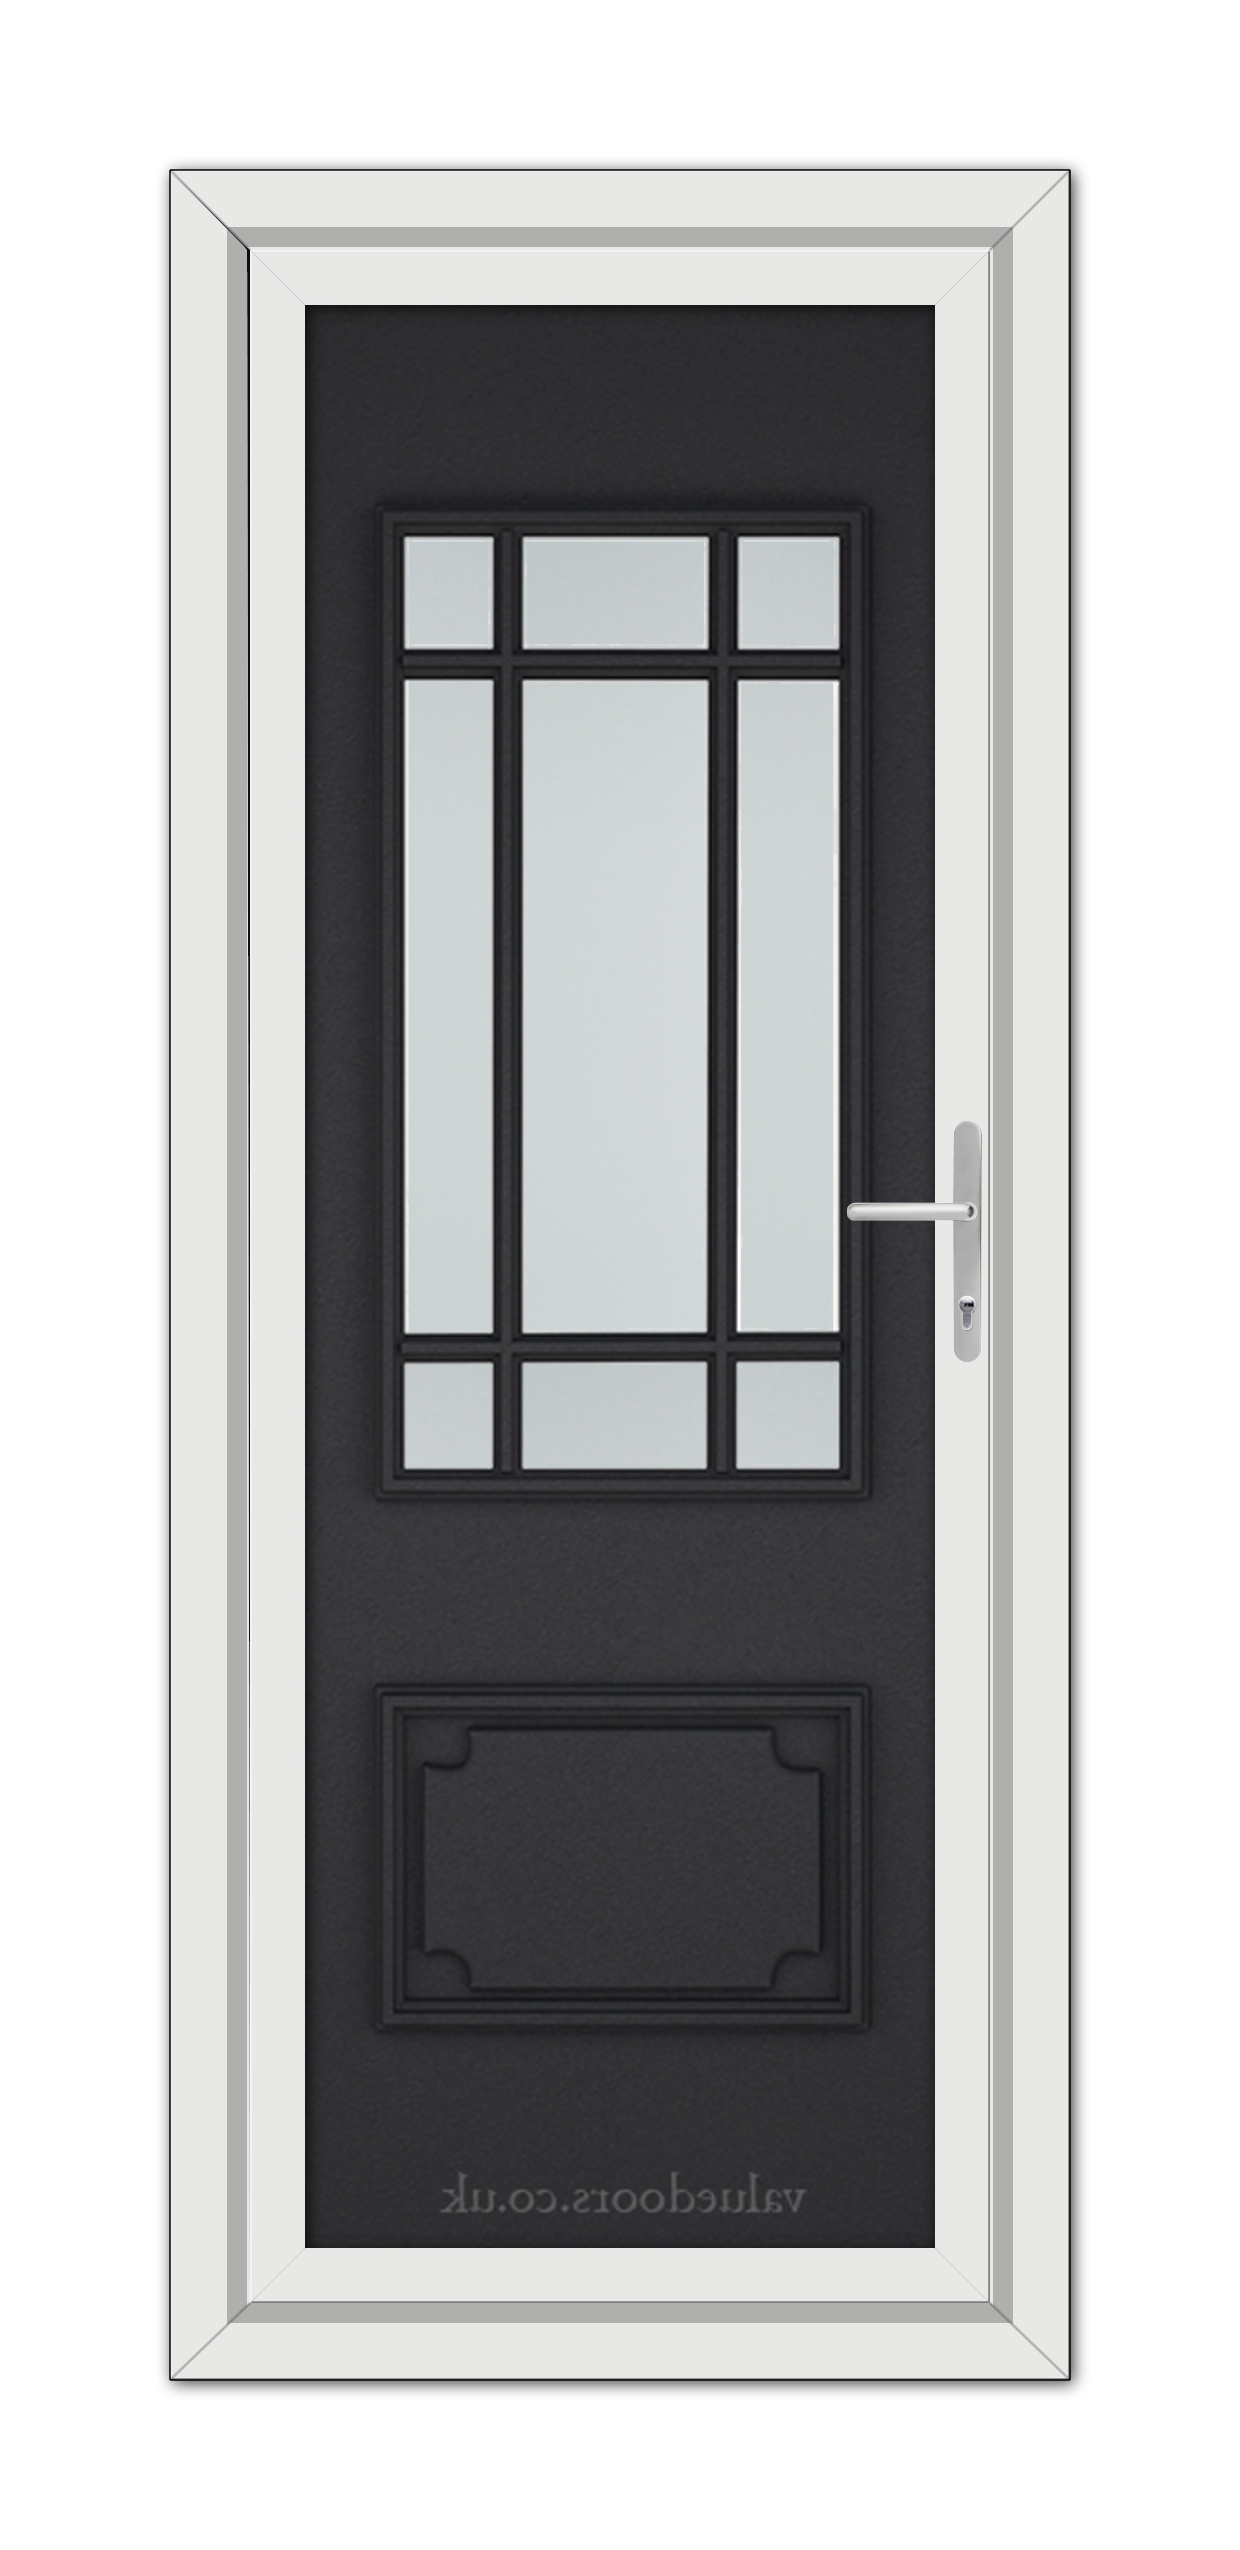 A modern Black Brown Seville uPVC Door with a rectangular glass window featuring white grid lines, framed in white, with a silver handle on the right.